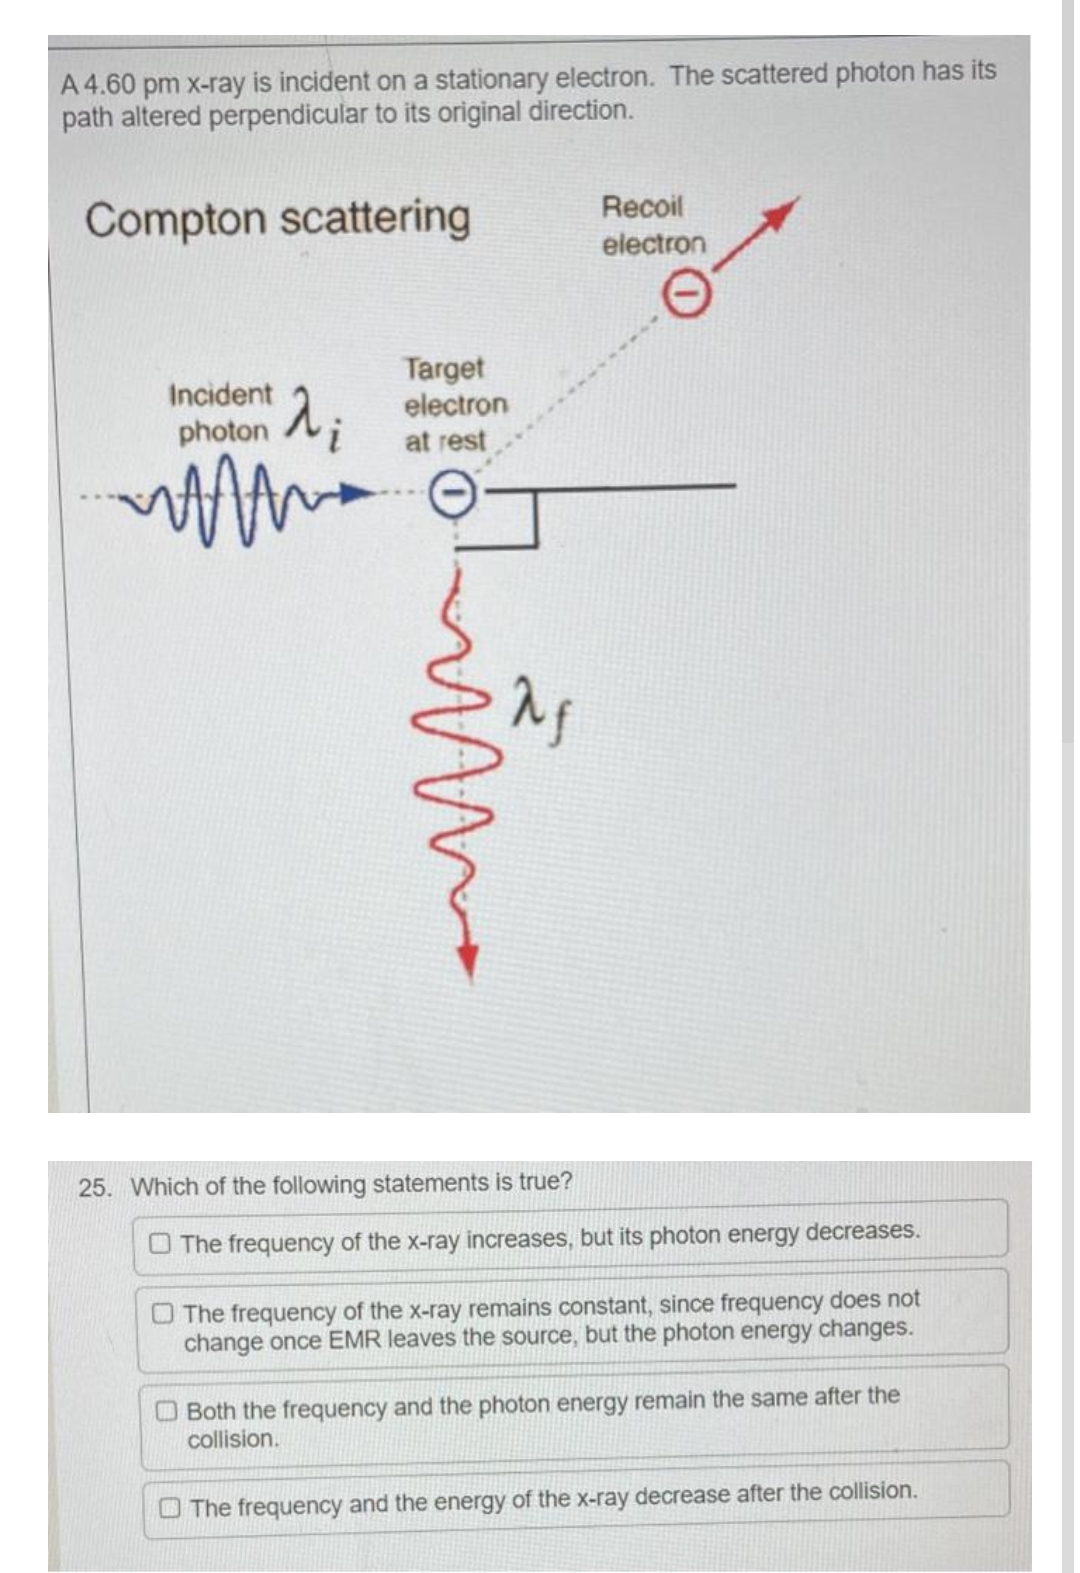 A 4.60 pm x-ray is incident on a stationary electron. The scattered photon has its
path altered perpendicular to its original direction.
Compton scattering
Recoil
electron
Incident
Target
electron
at rest
photoni
MAAA
ima
25. Which of the following statements is true?
The frequency of the x-ray increases, but its photon energy decreases.
The frequency of the x-ray remains constant, since frequency does not
change once EMR leaves the source, but the photon energy changes.
Both the frequency and the photon energy remain the same after the
collision.
The frequency and the energy of the x-ray decrease after the collision.